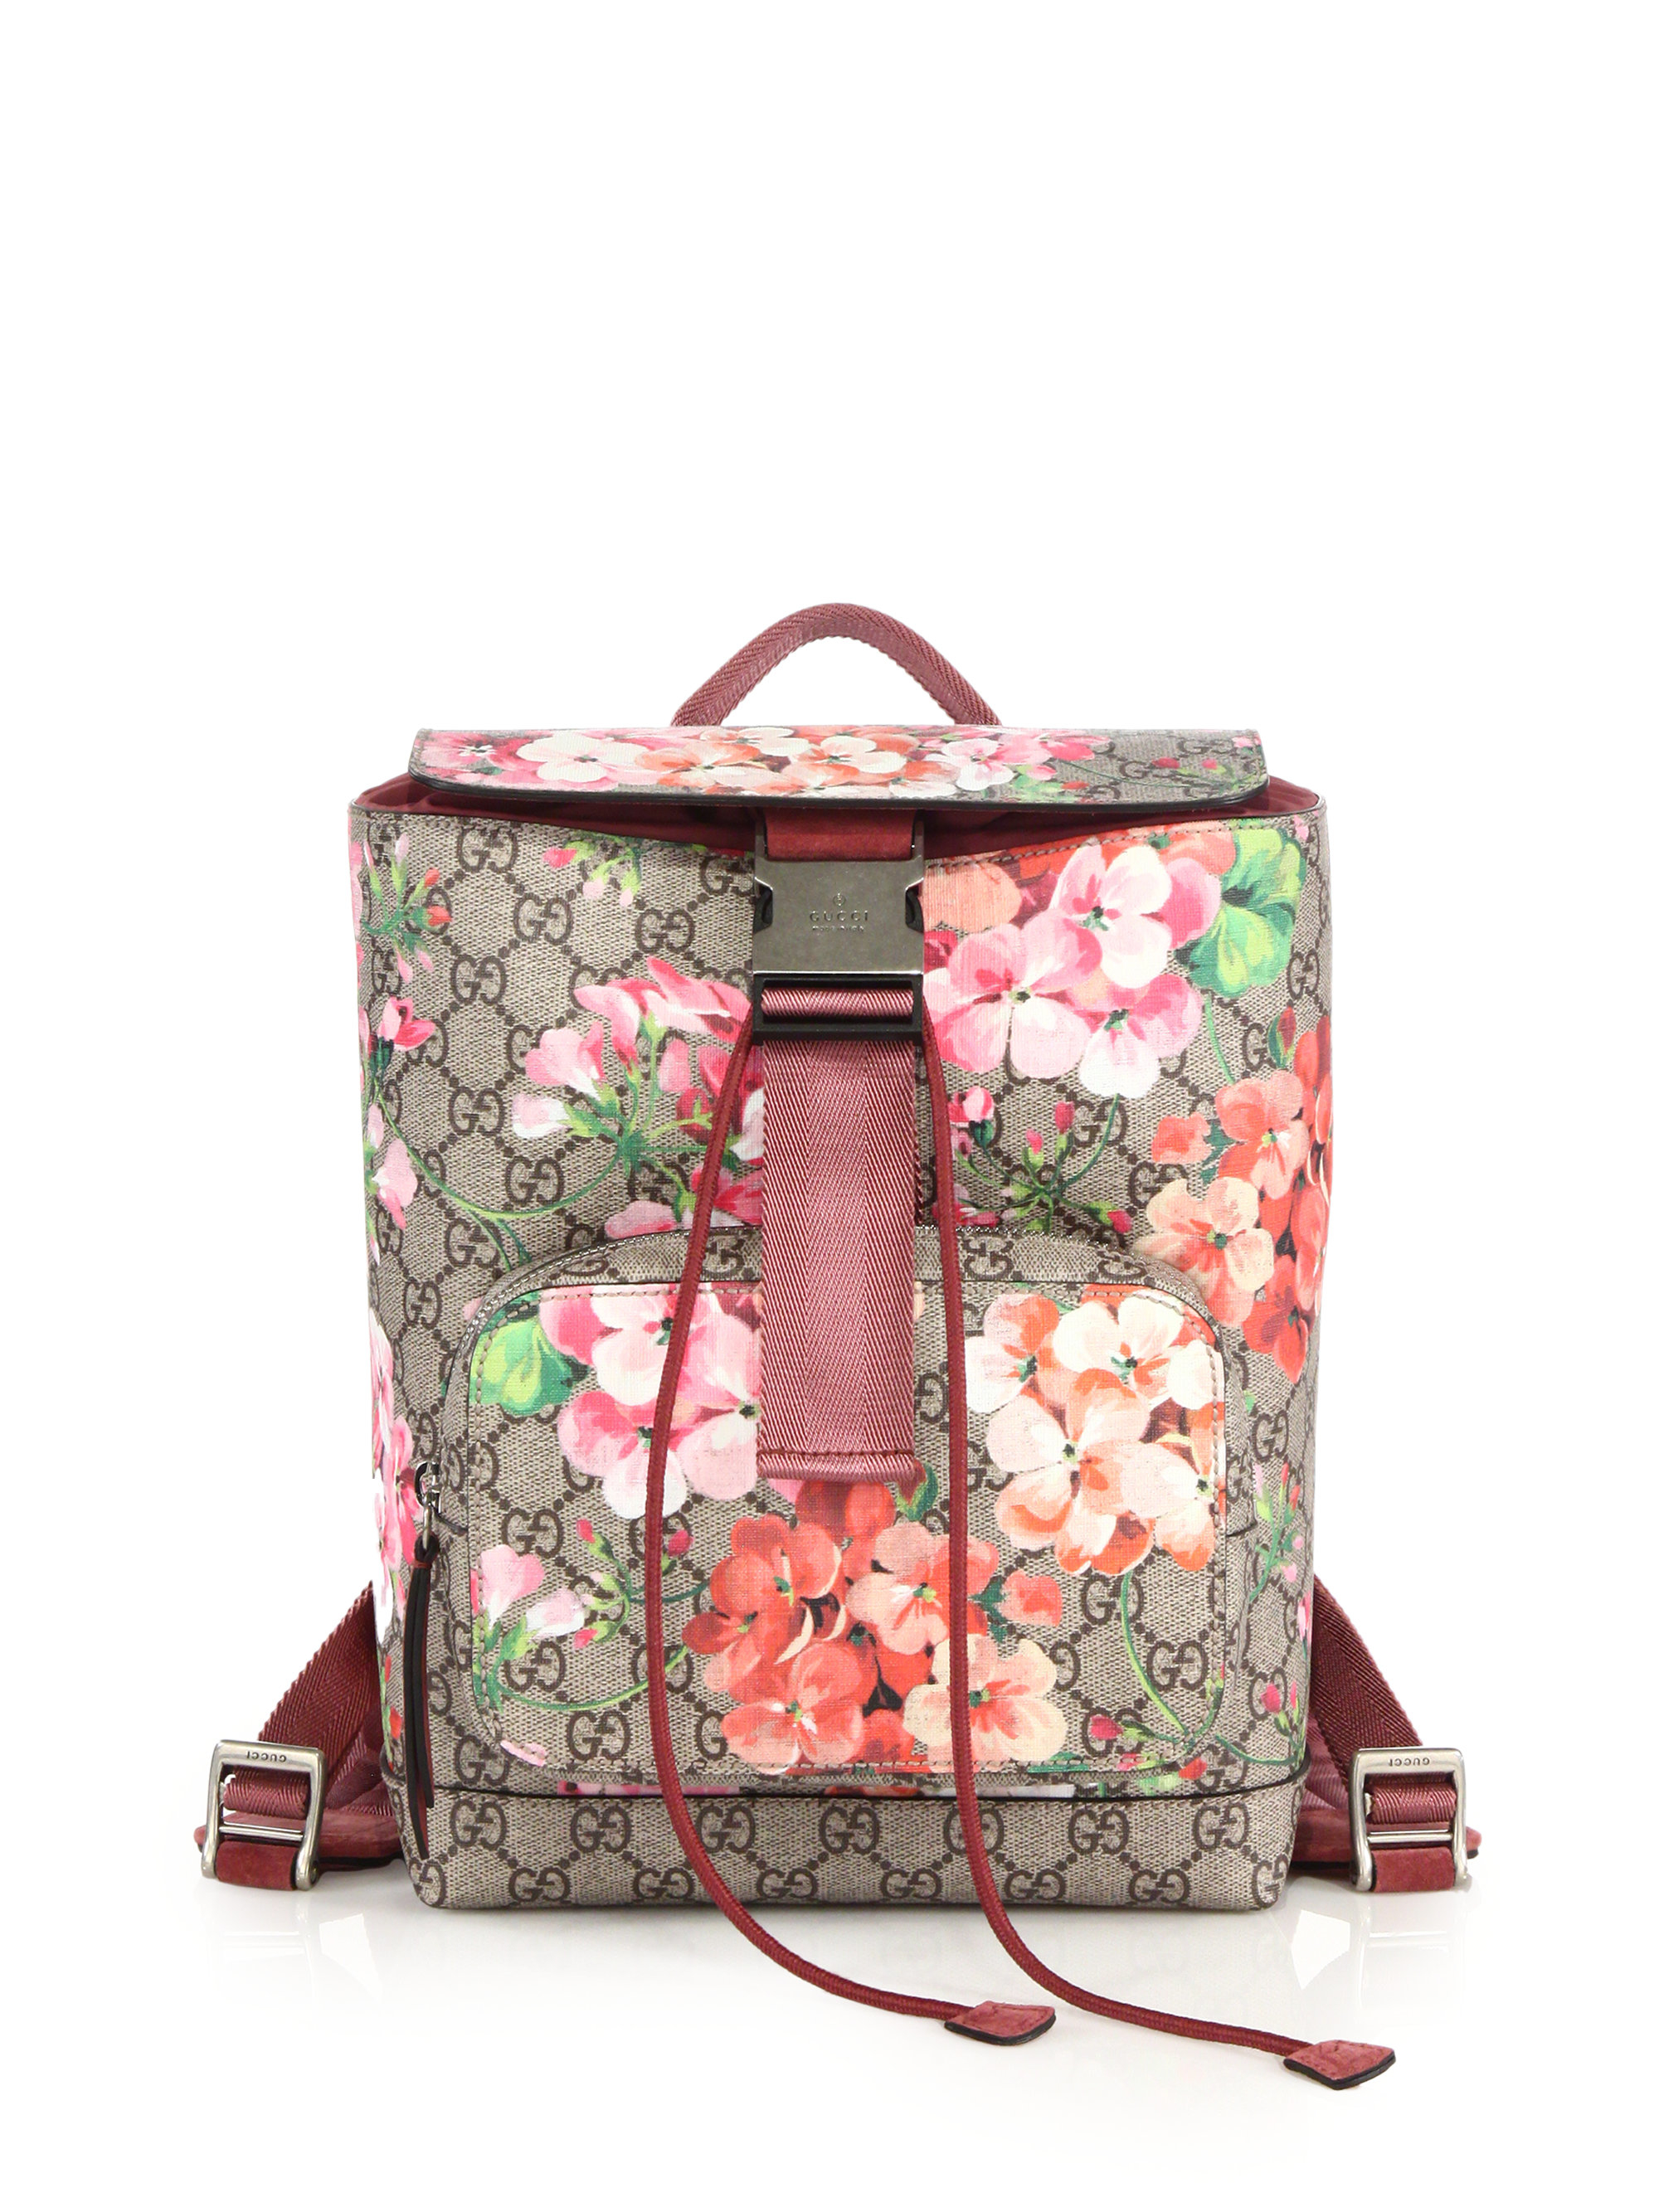 Gucci Suede Gg Blooms Small Backpack in 